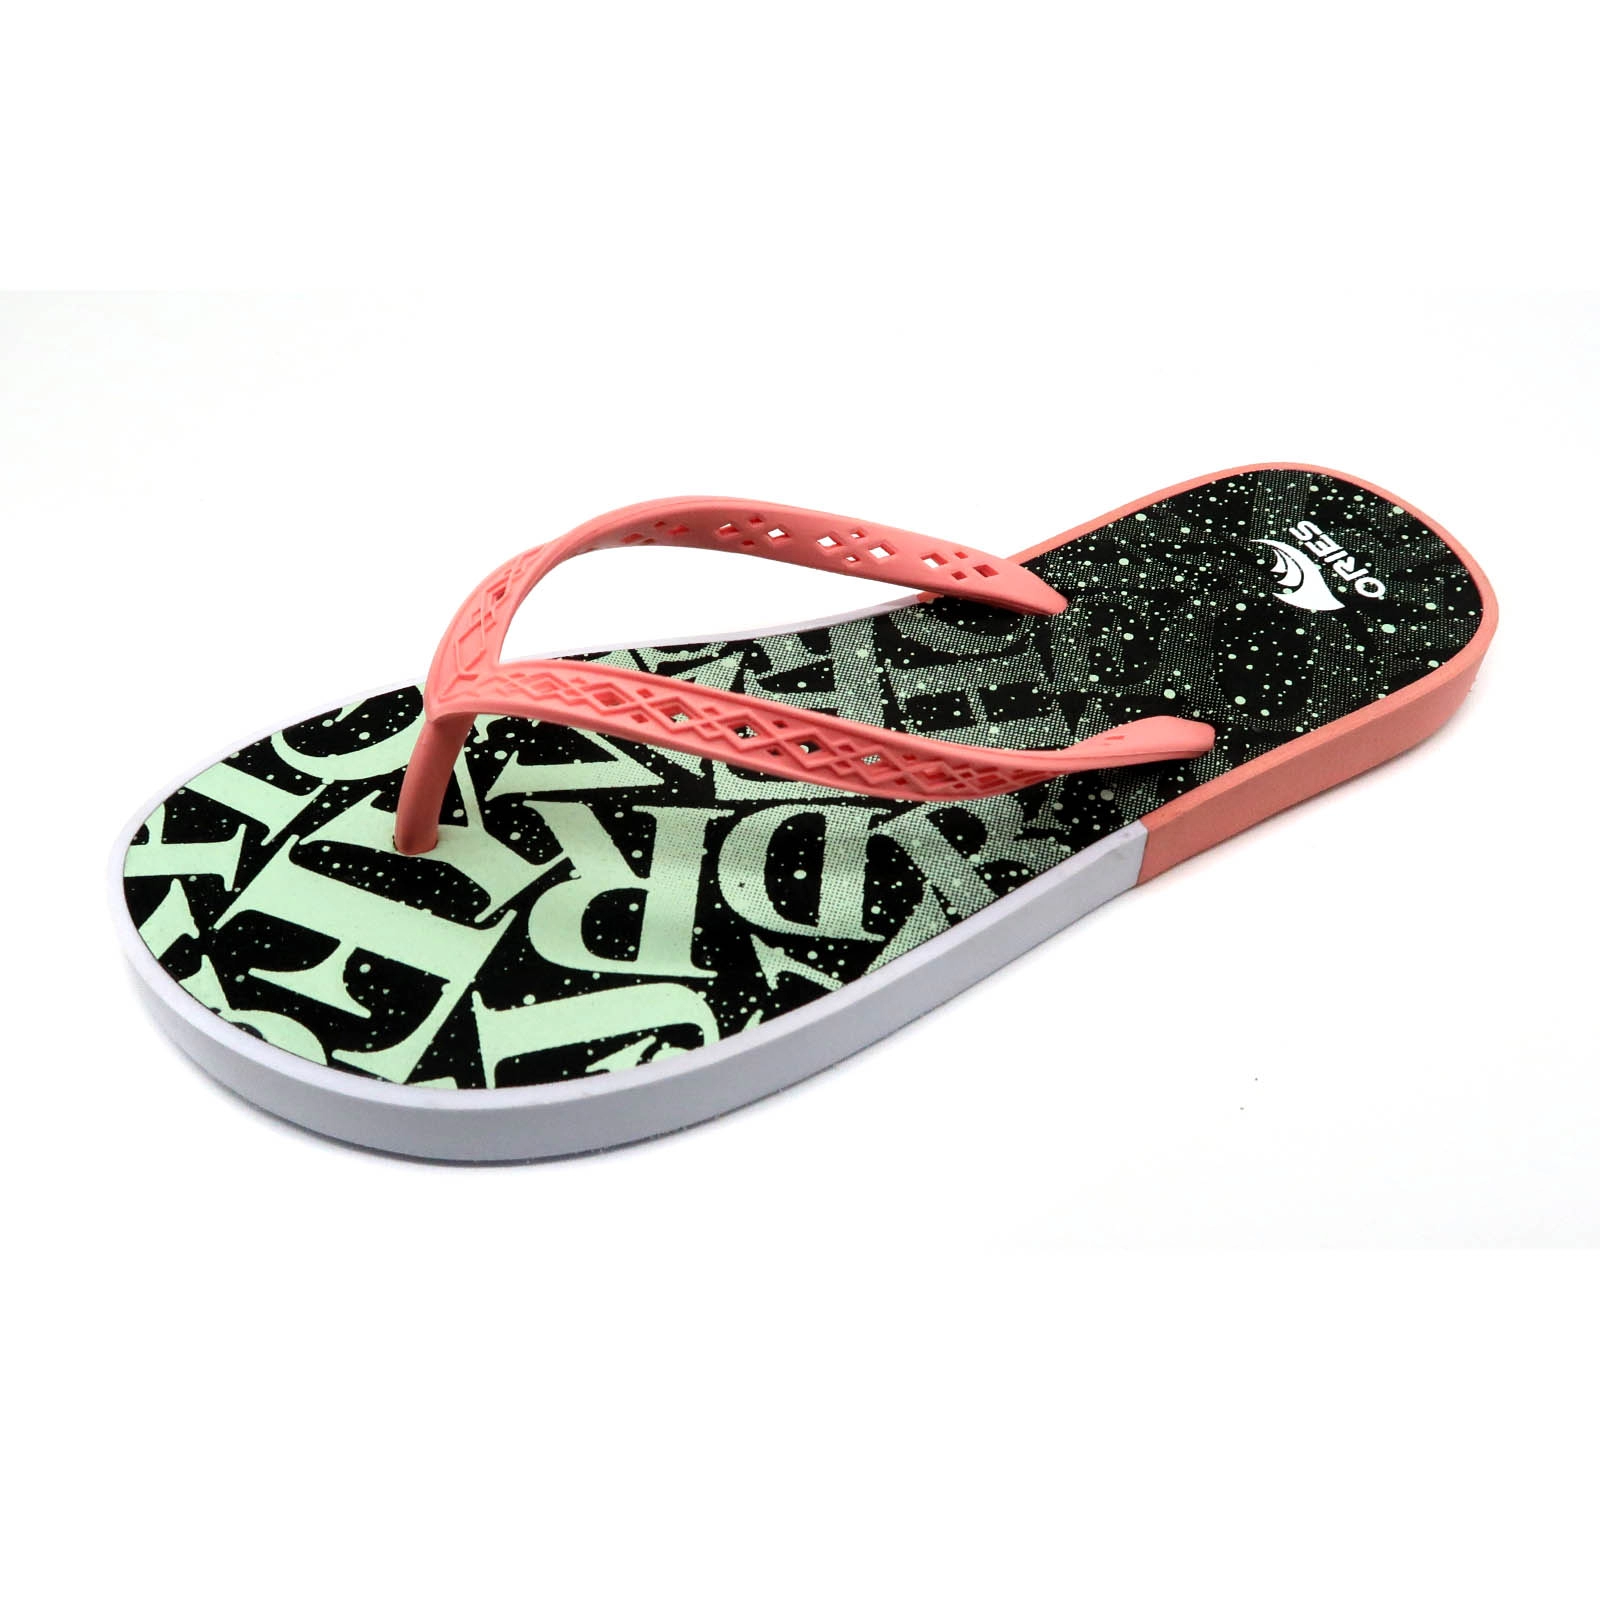 EVA around the sole edge and carved strap fashion girl Flip Flops Sandal